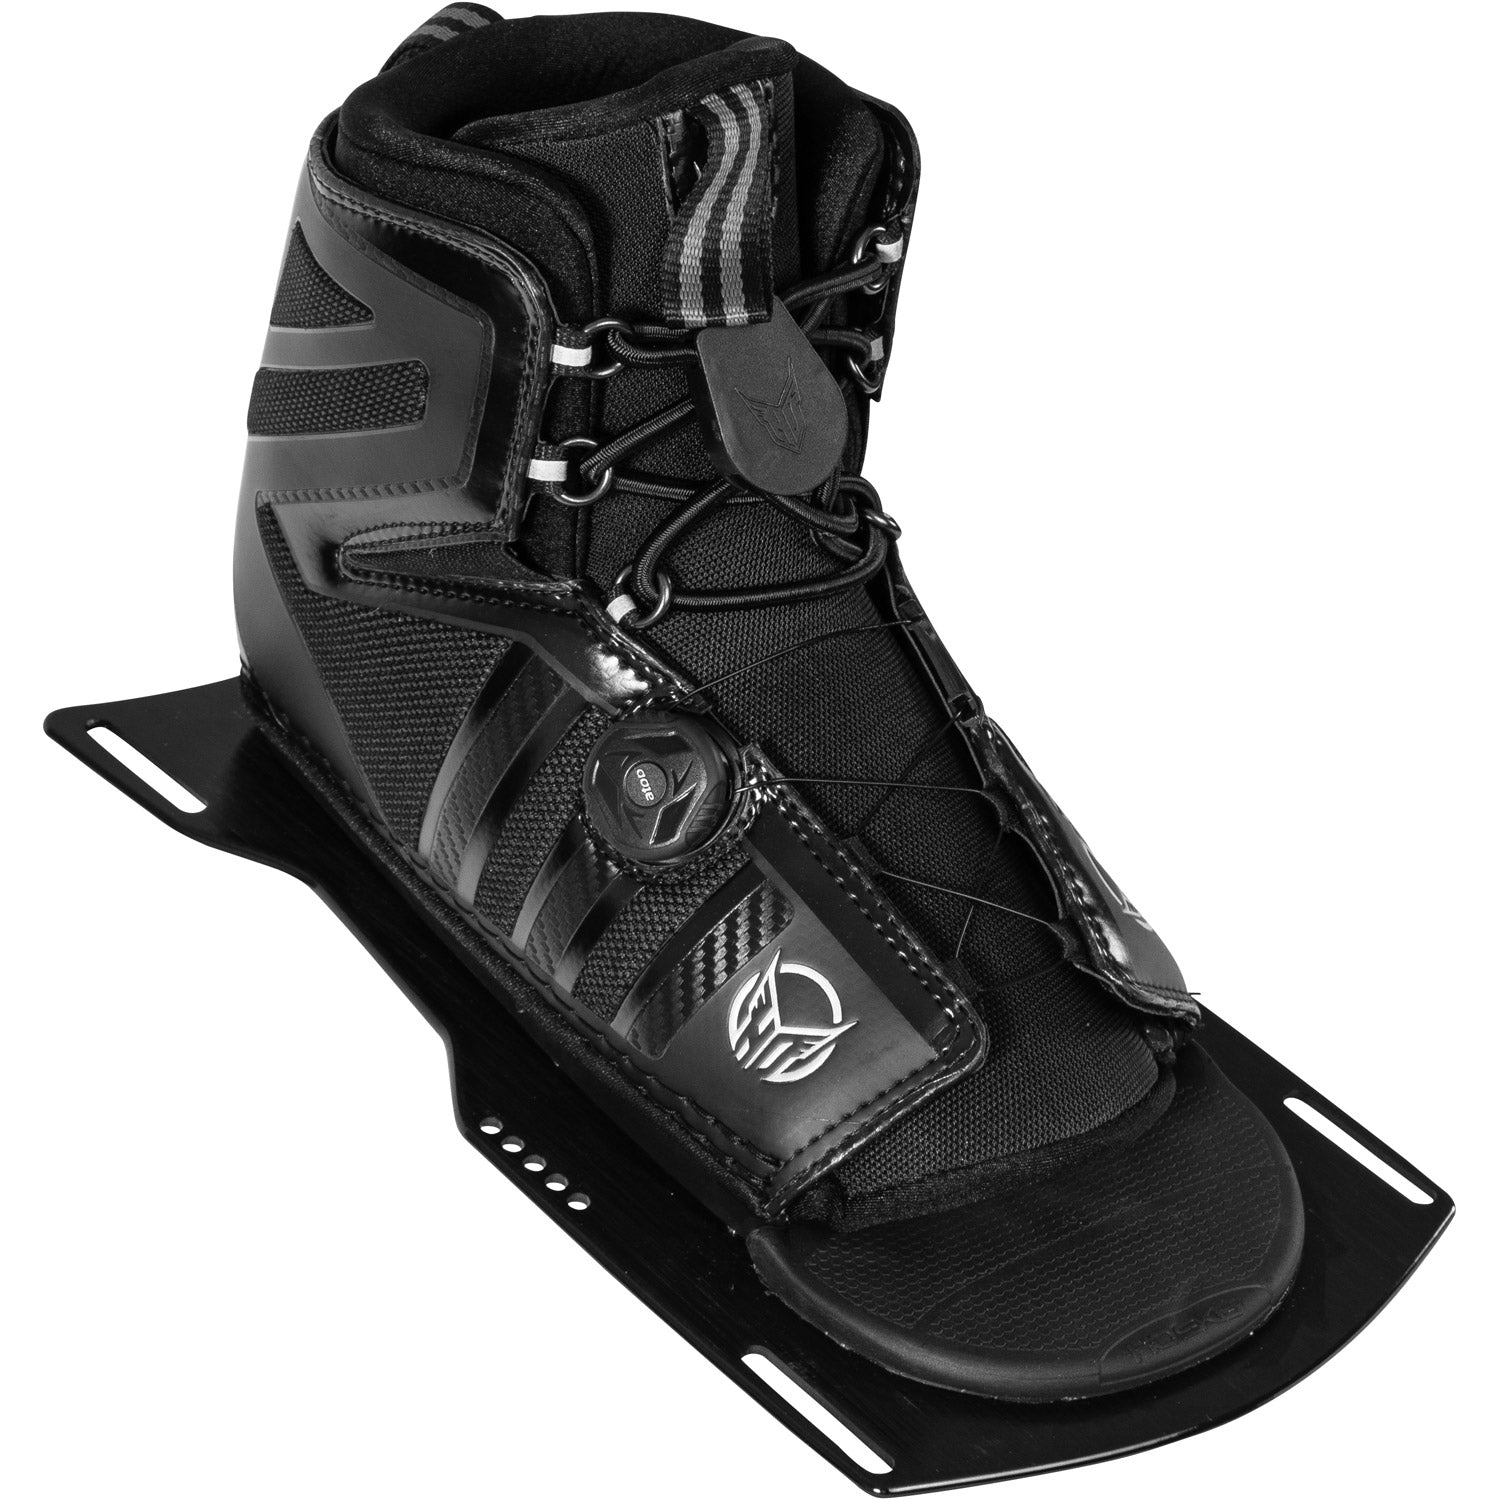 Syndicate Works 02 Slalom Ski w/ Stance 130 Atop Boot Package